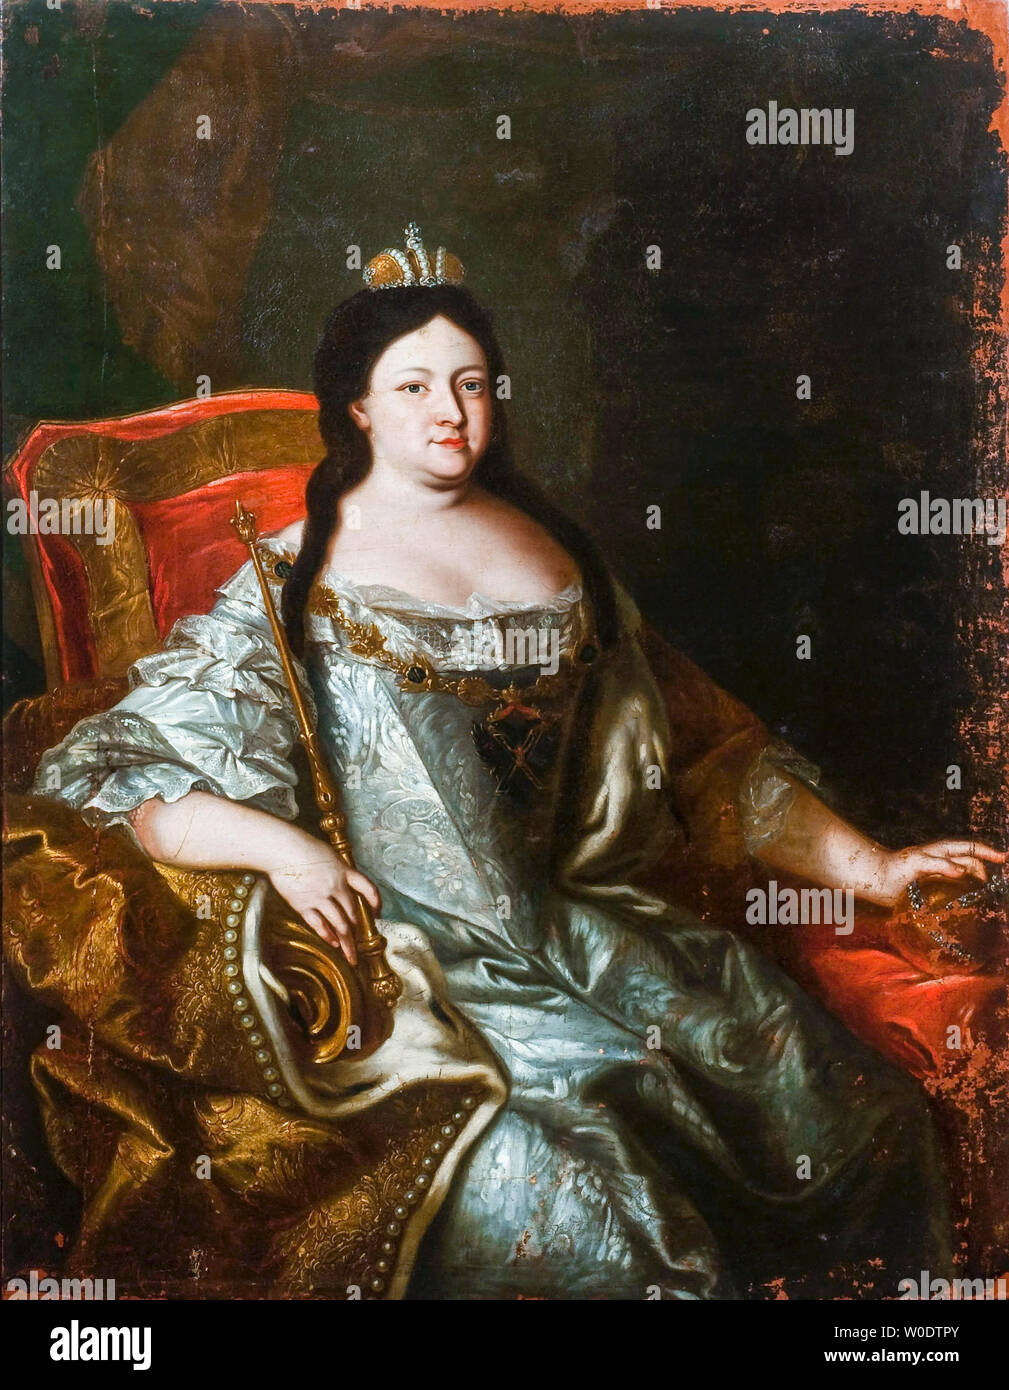 Empress Anna of Russia, 1693-1740, portrait painting, 1730-1740 Stock Photo